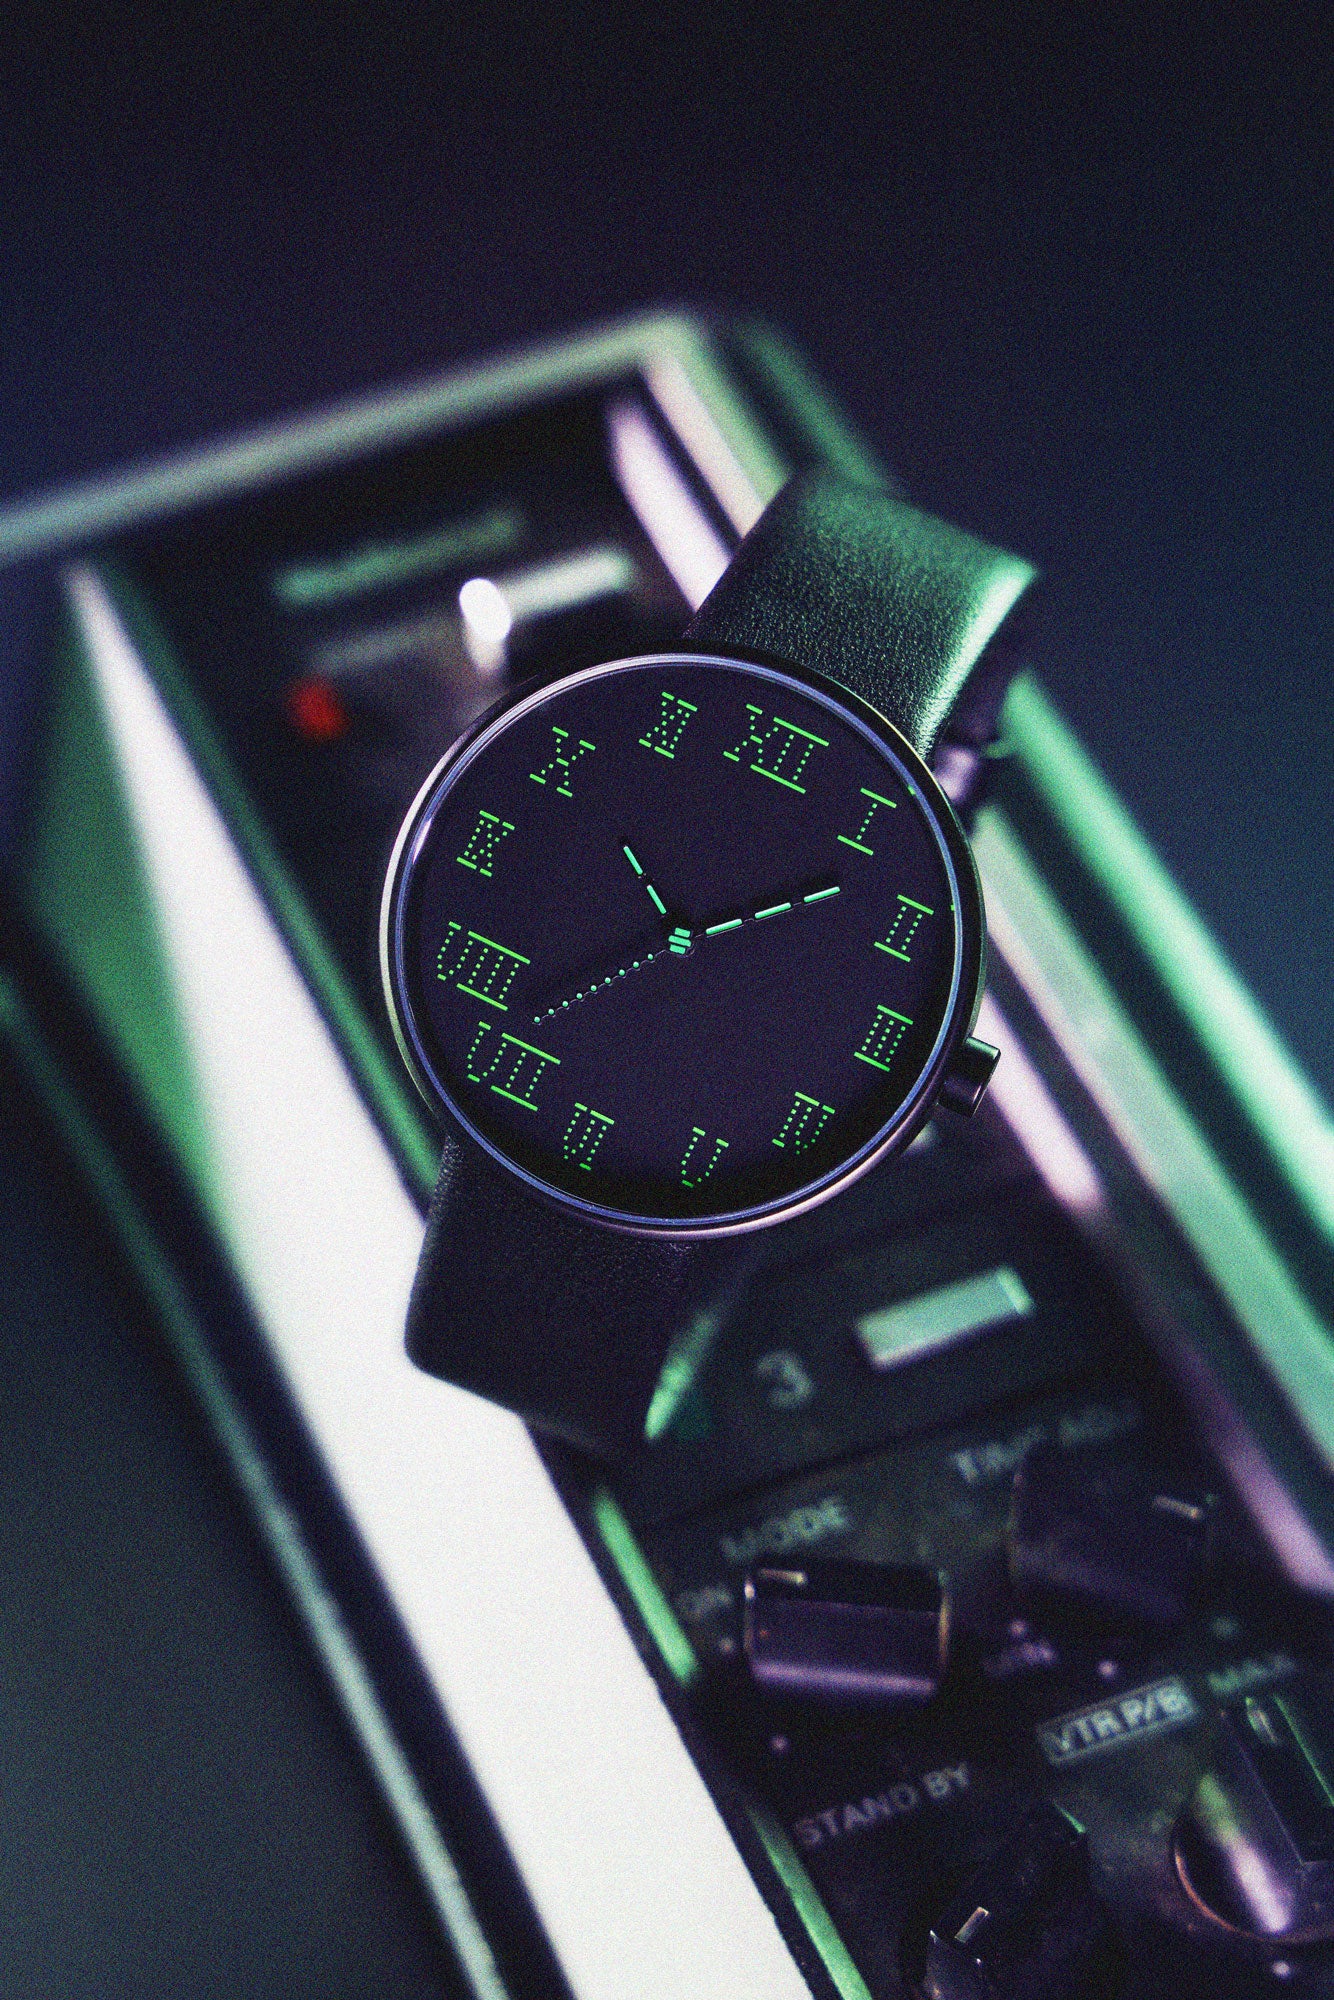 Featuring the front view of the TTT - ACTUAL SOURCE - THERMAL watch on an LCD monitor background, evoking a nostalgic retro vibe.